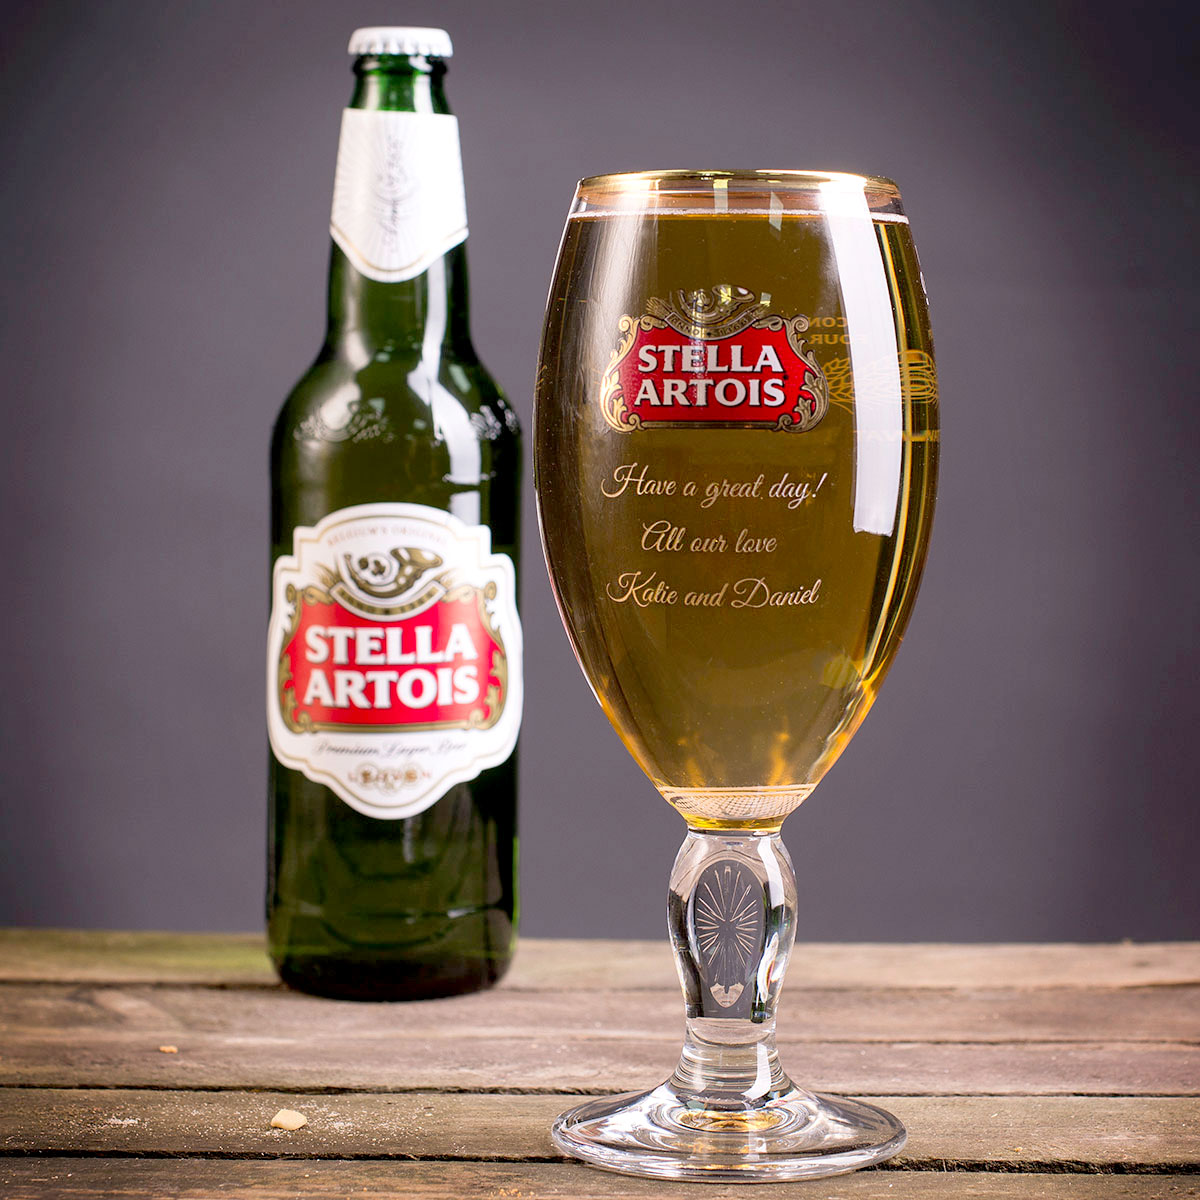 Stella Artois and Chalice Beer Glasses Set  Official Licensed Stella Artois  Lager Gift Set  Premium Stella Artois 330 ml and 1 x 330 ml Pint Glass   Perfect Beer Gifts